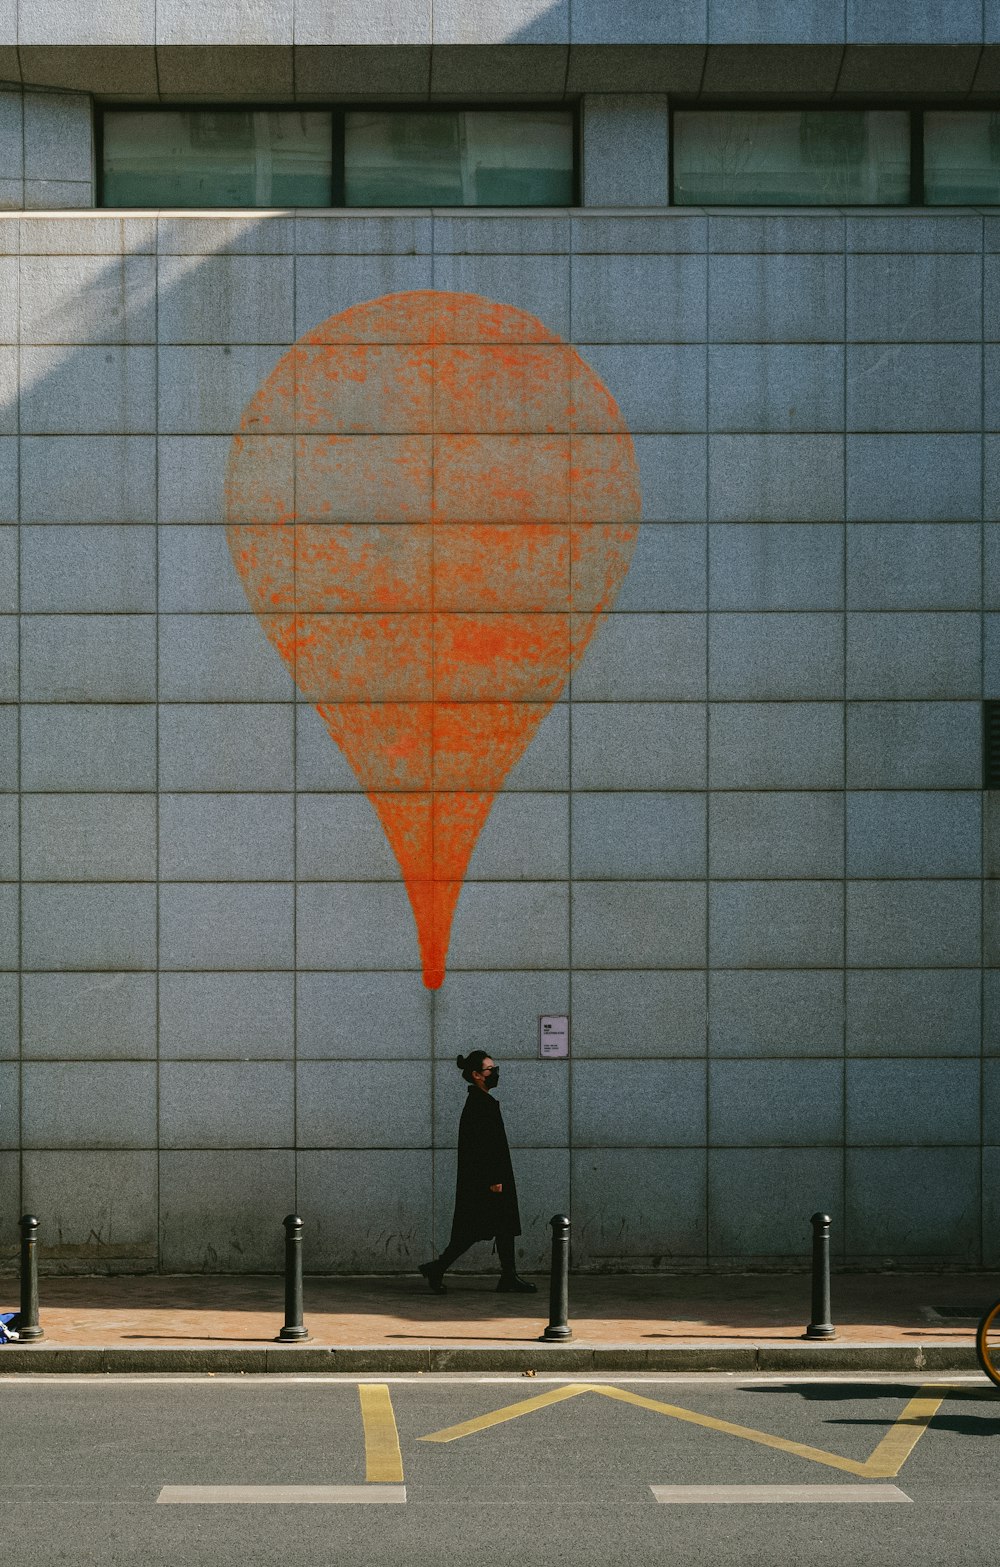 a person walking down a street past a building with a large orange balloon painted on